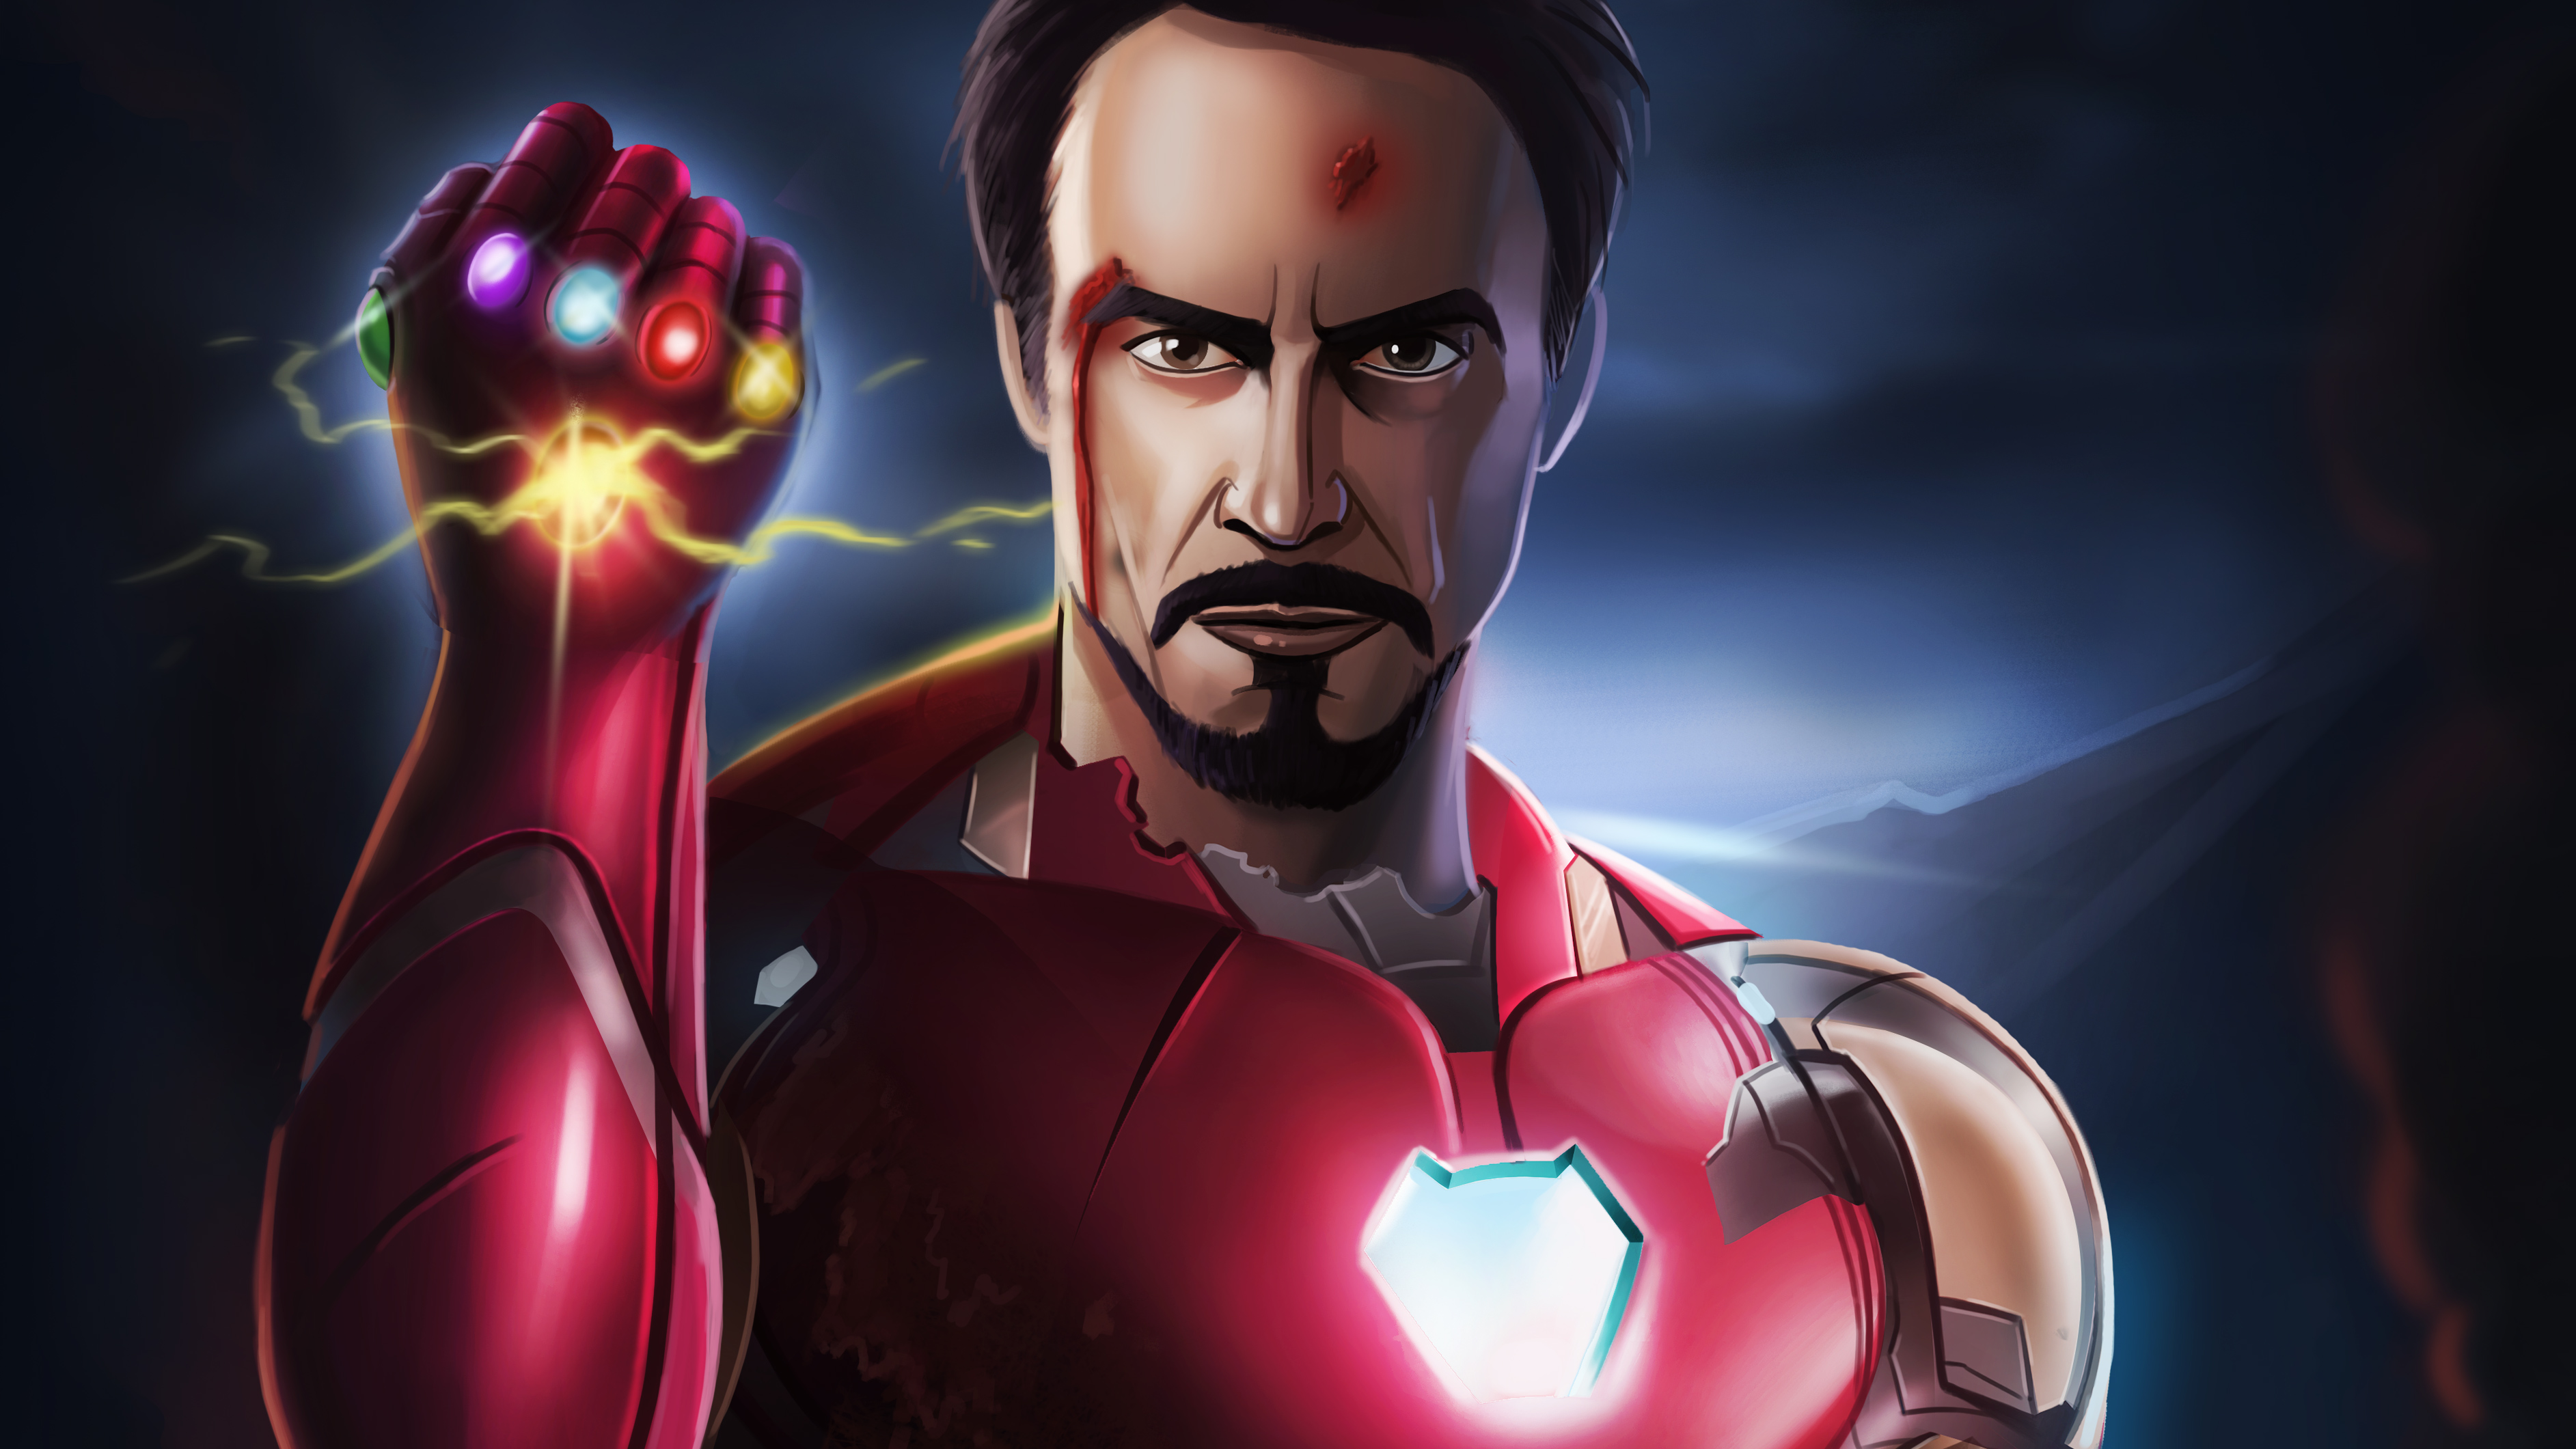 I Am Iron Man Wallpaper Hd Artist K Wallpapers Images Photos And 31872 Hot Sex Picture 1622